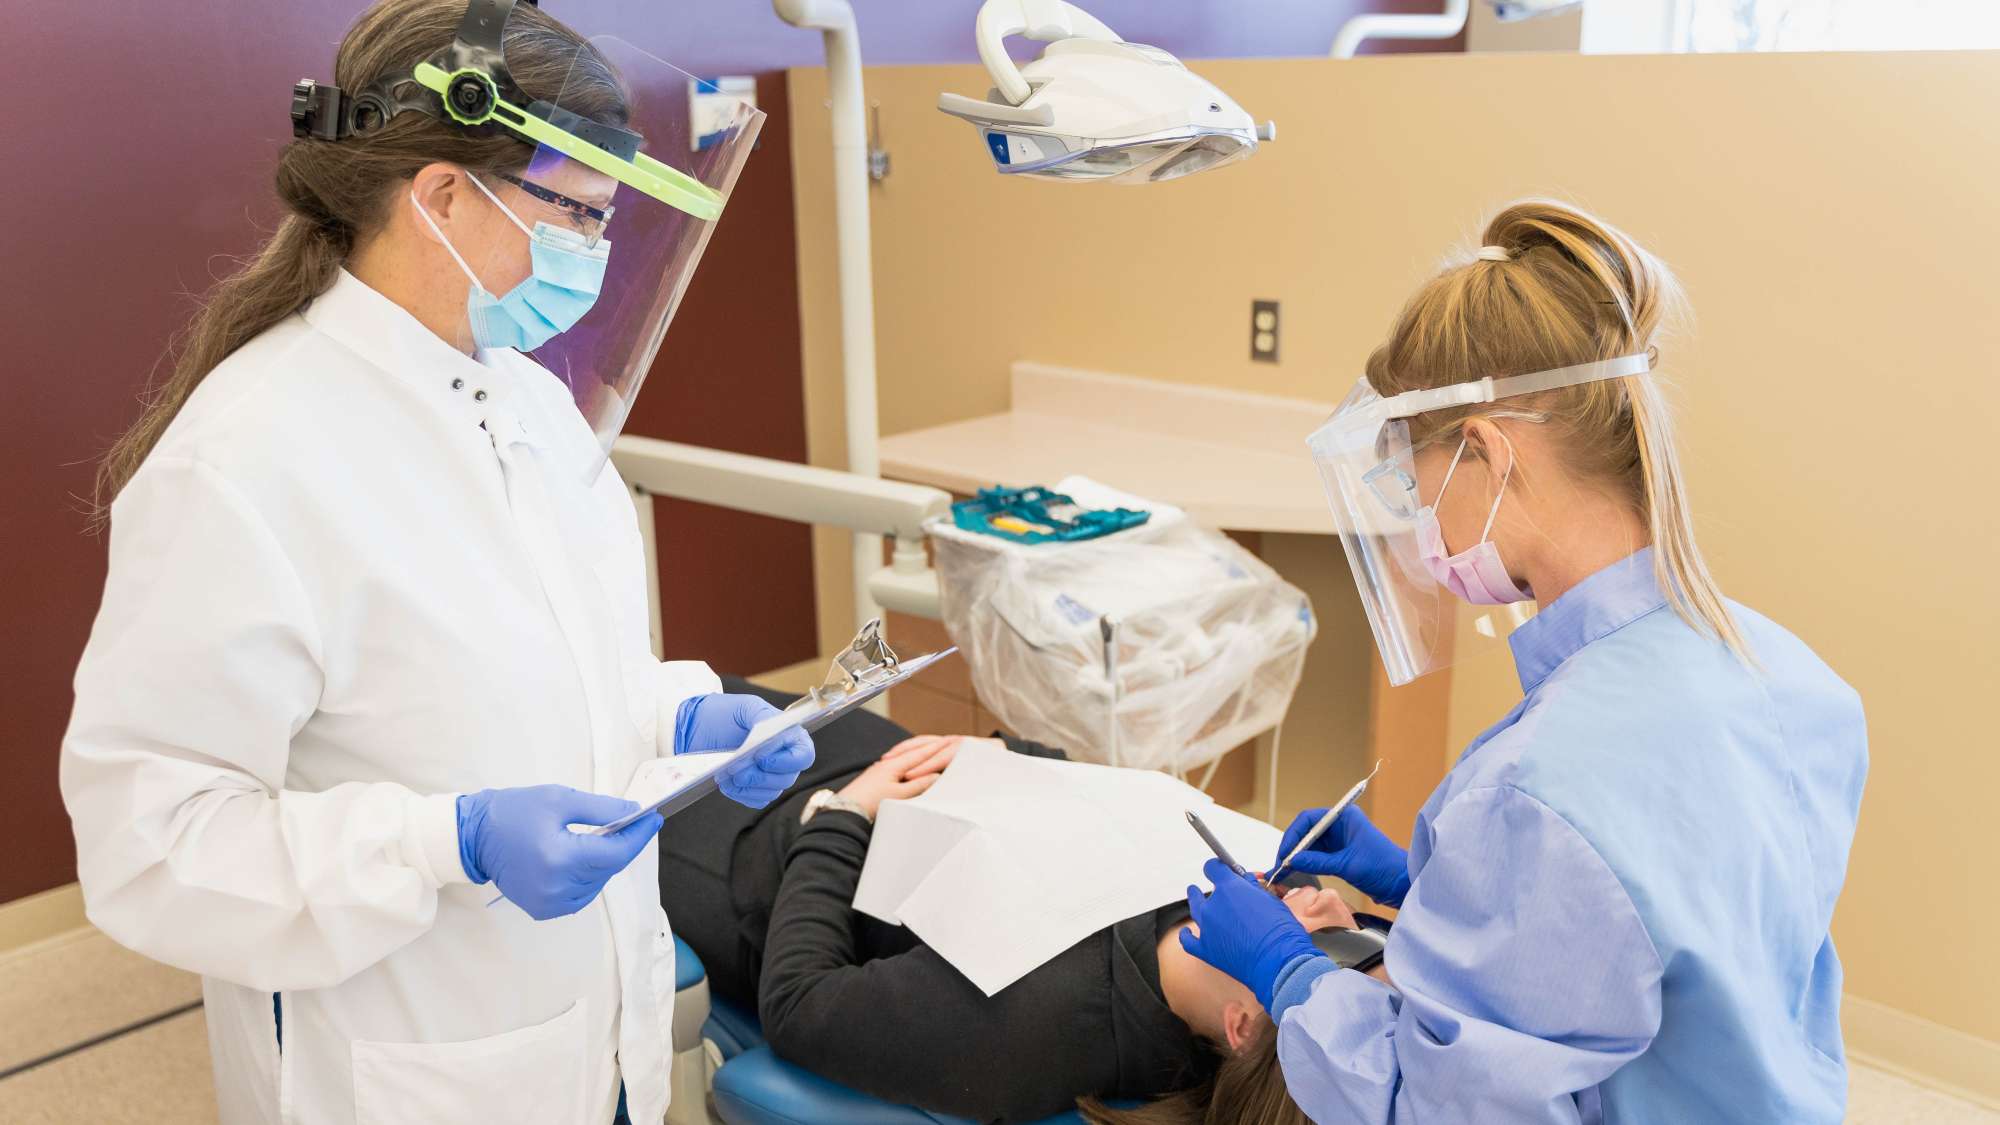 A dental hygienist performs an oral cleaning on a patient while a dentist observes her work with a clipboard in hand.